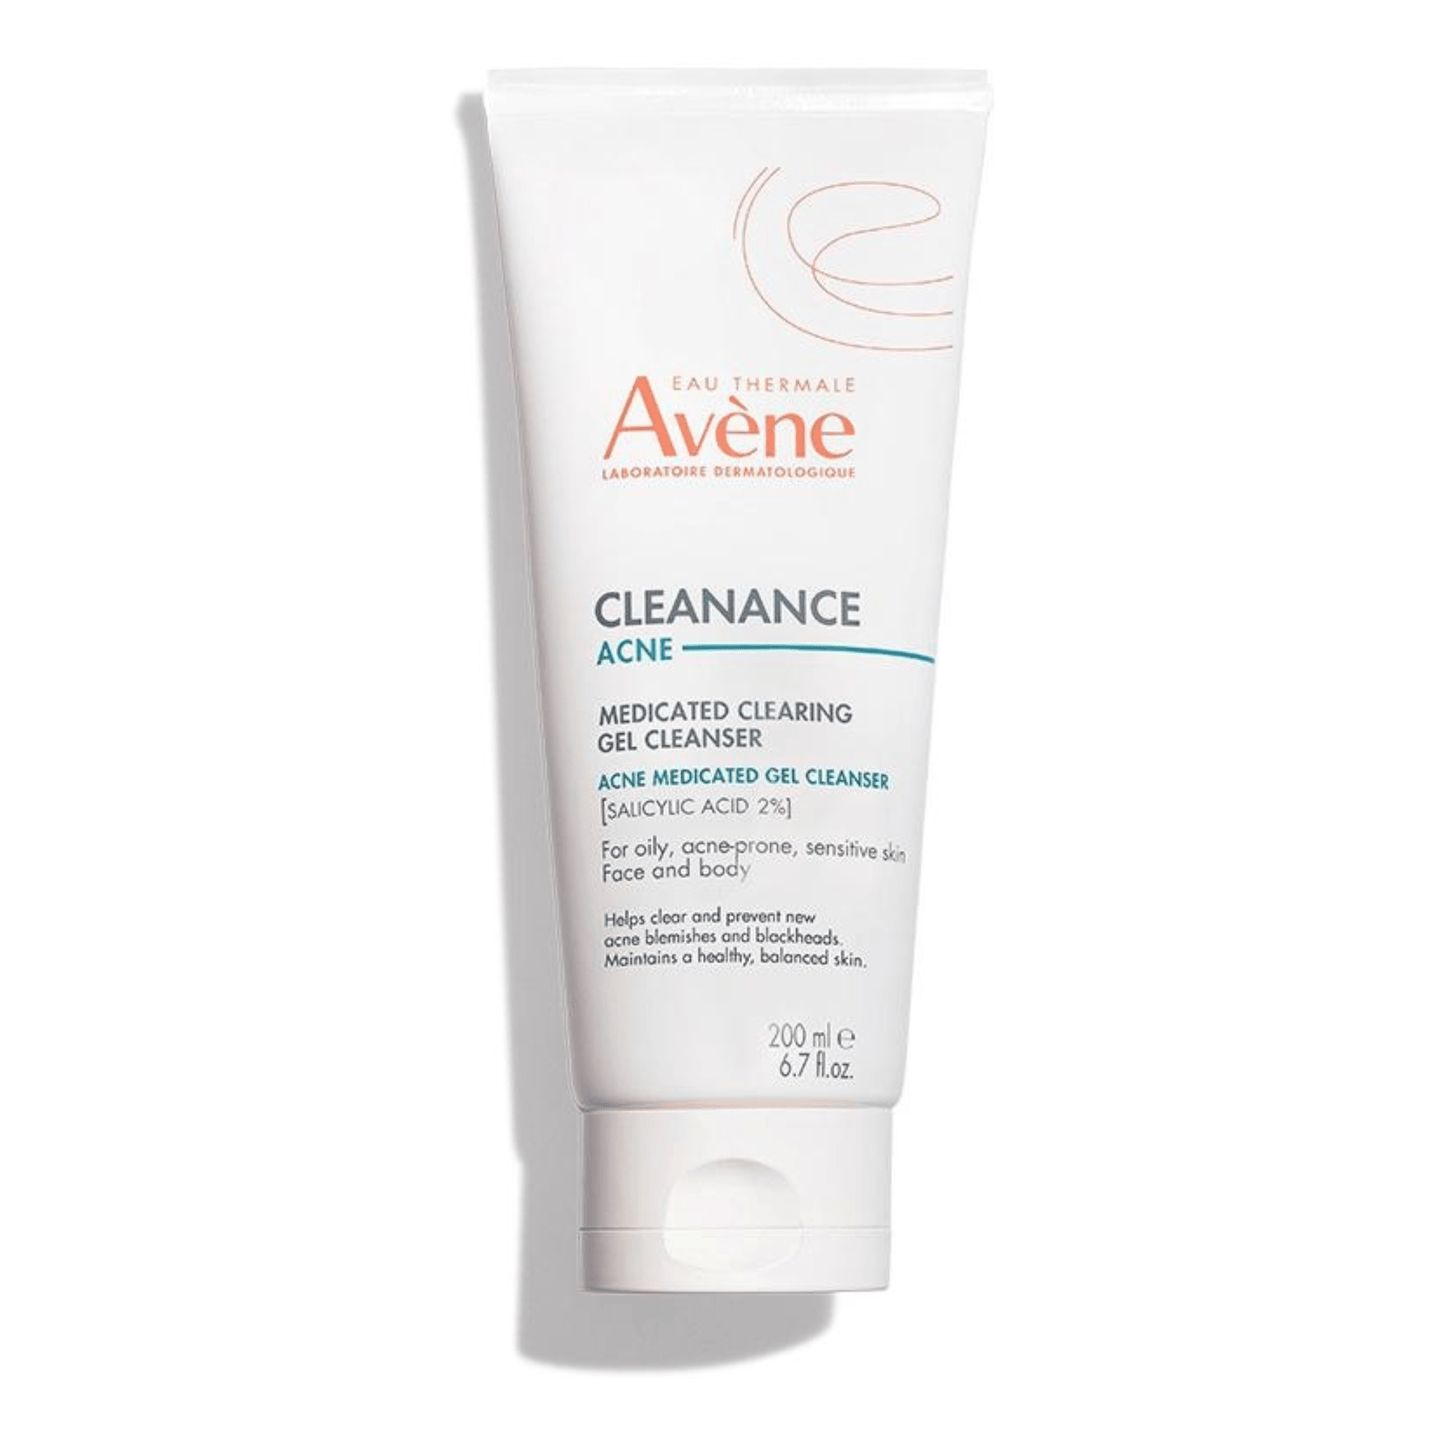 Primary Image of Cleanance Acne Cleanser